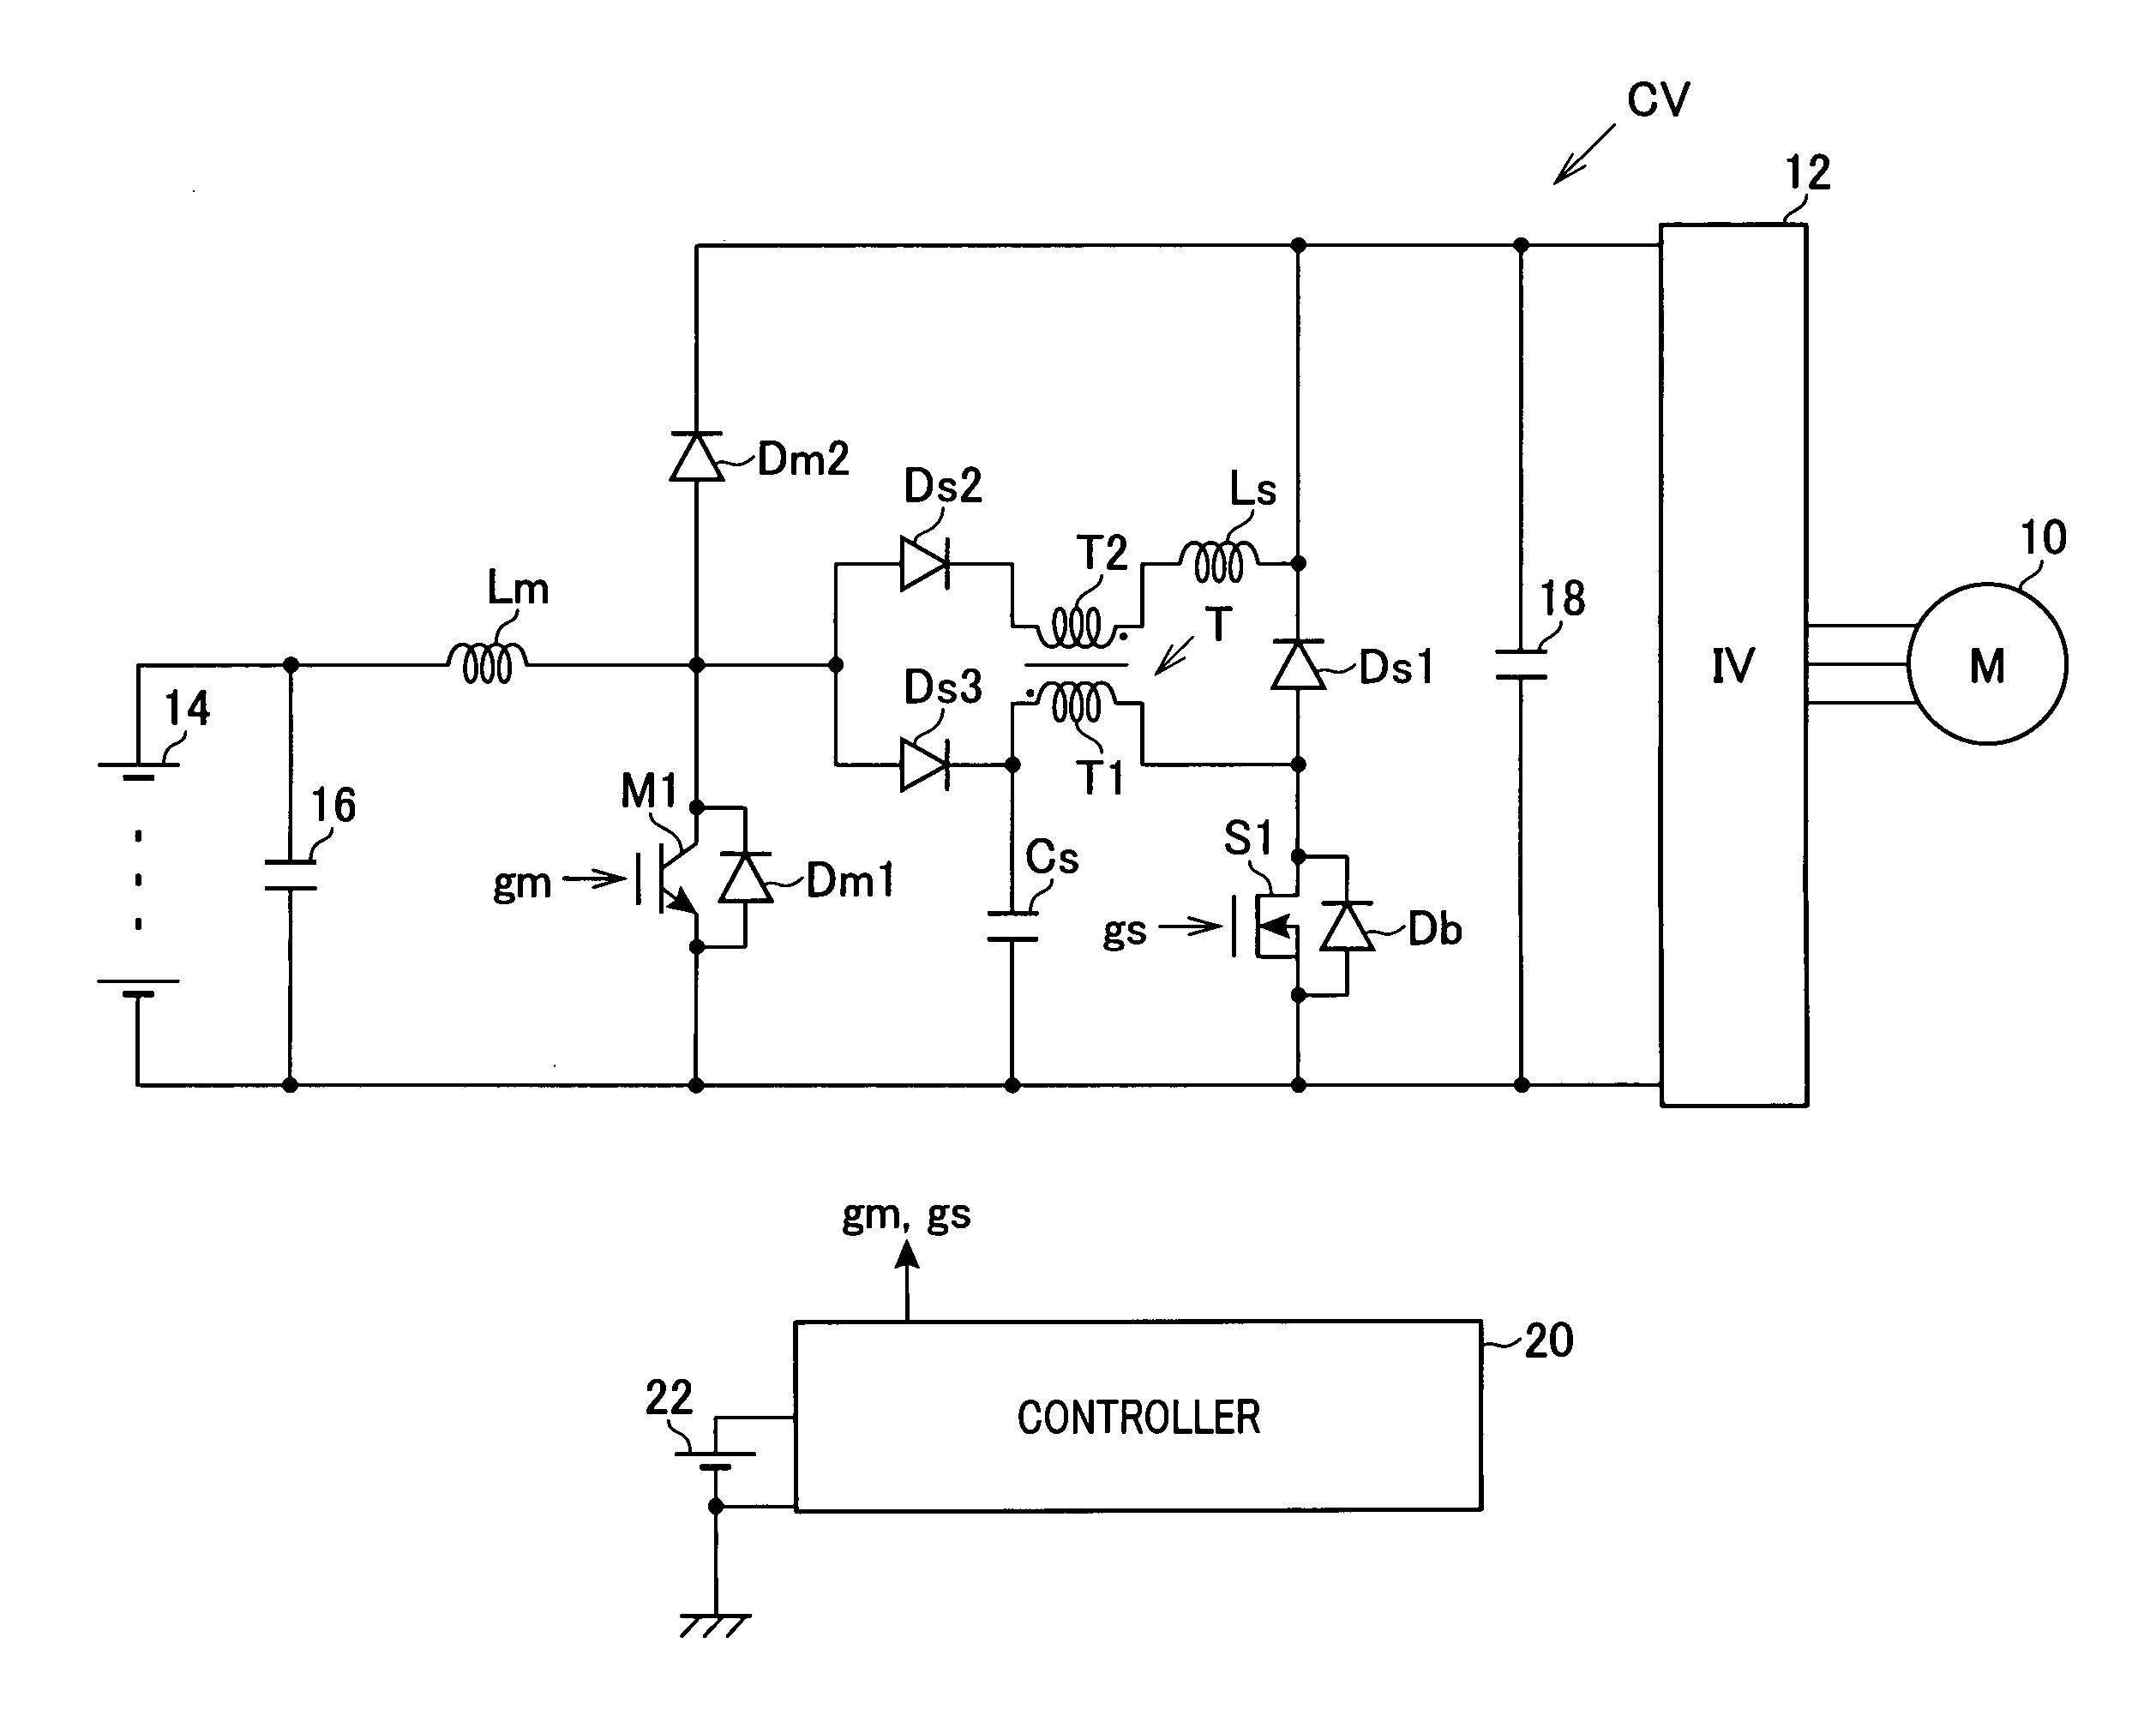 Power converter with high efficiency in operation